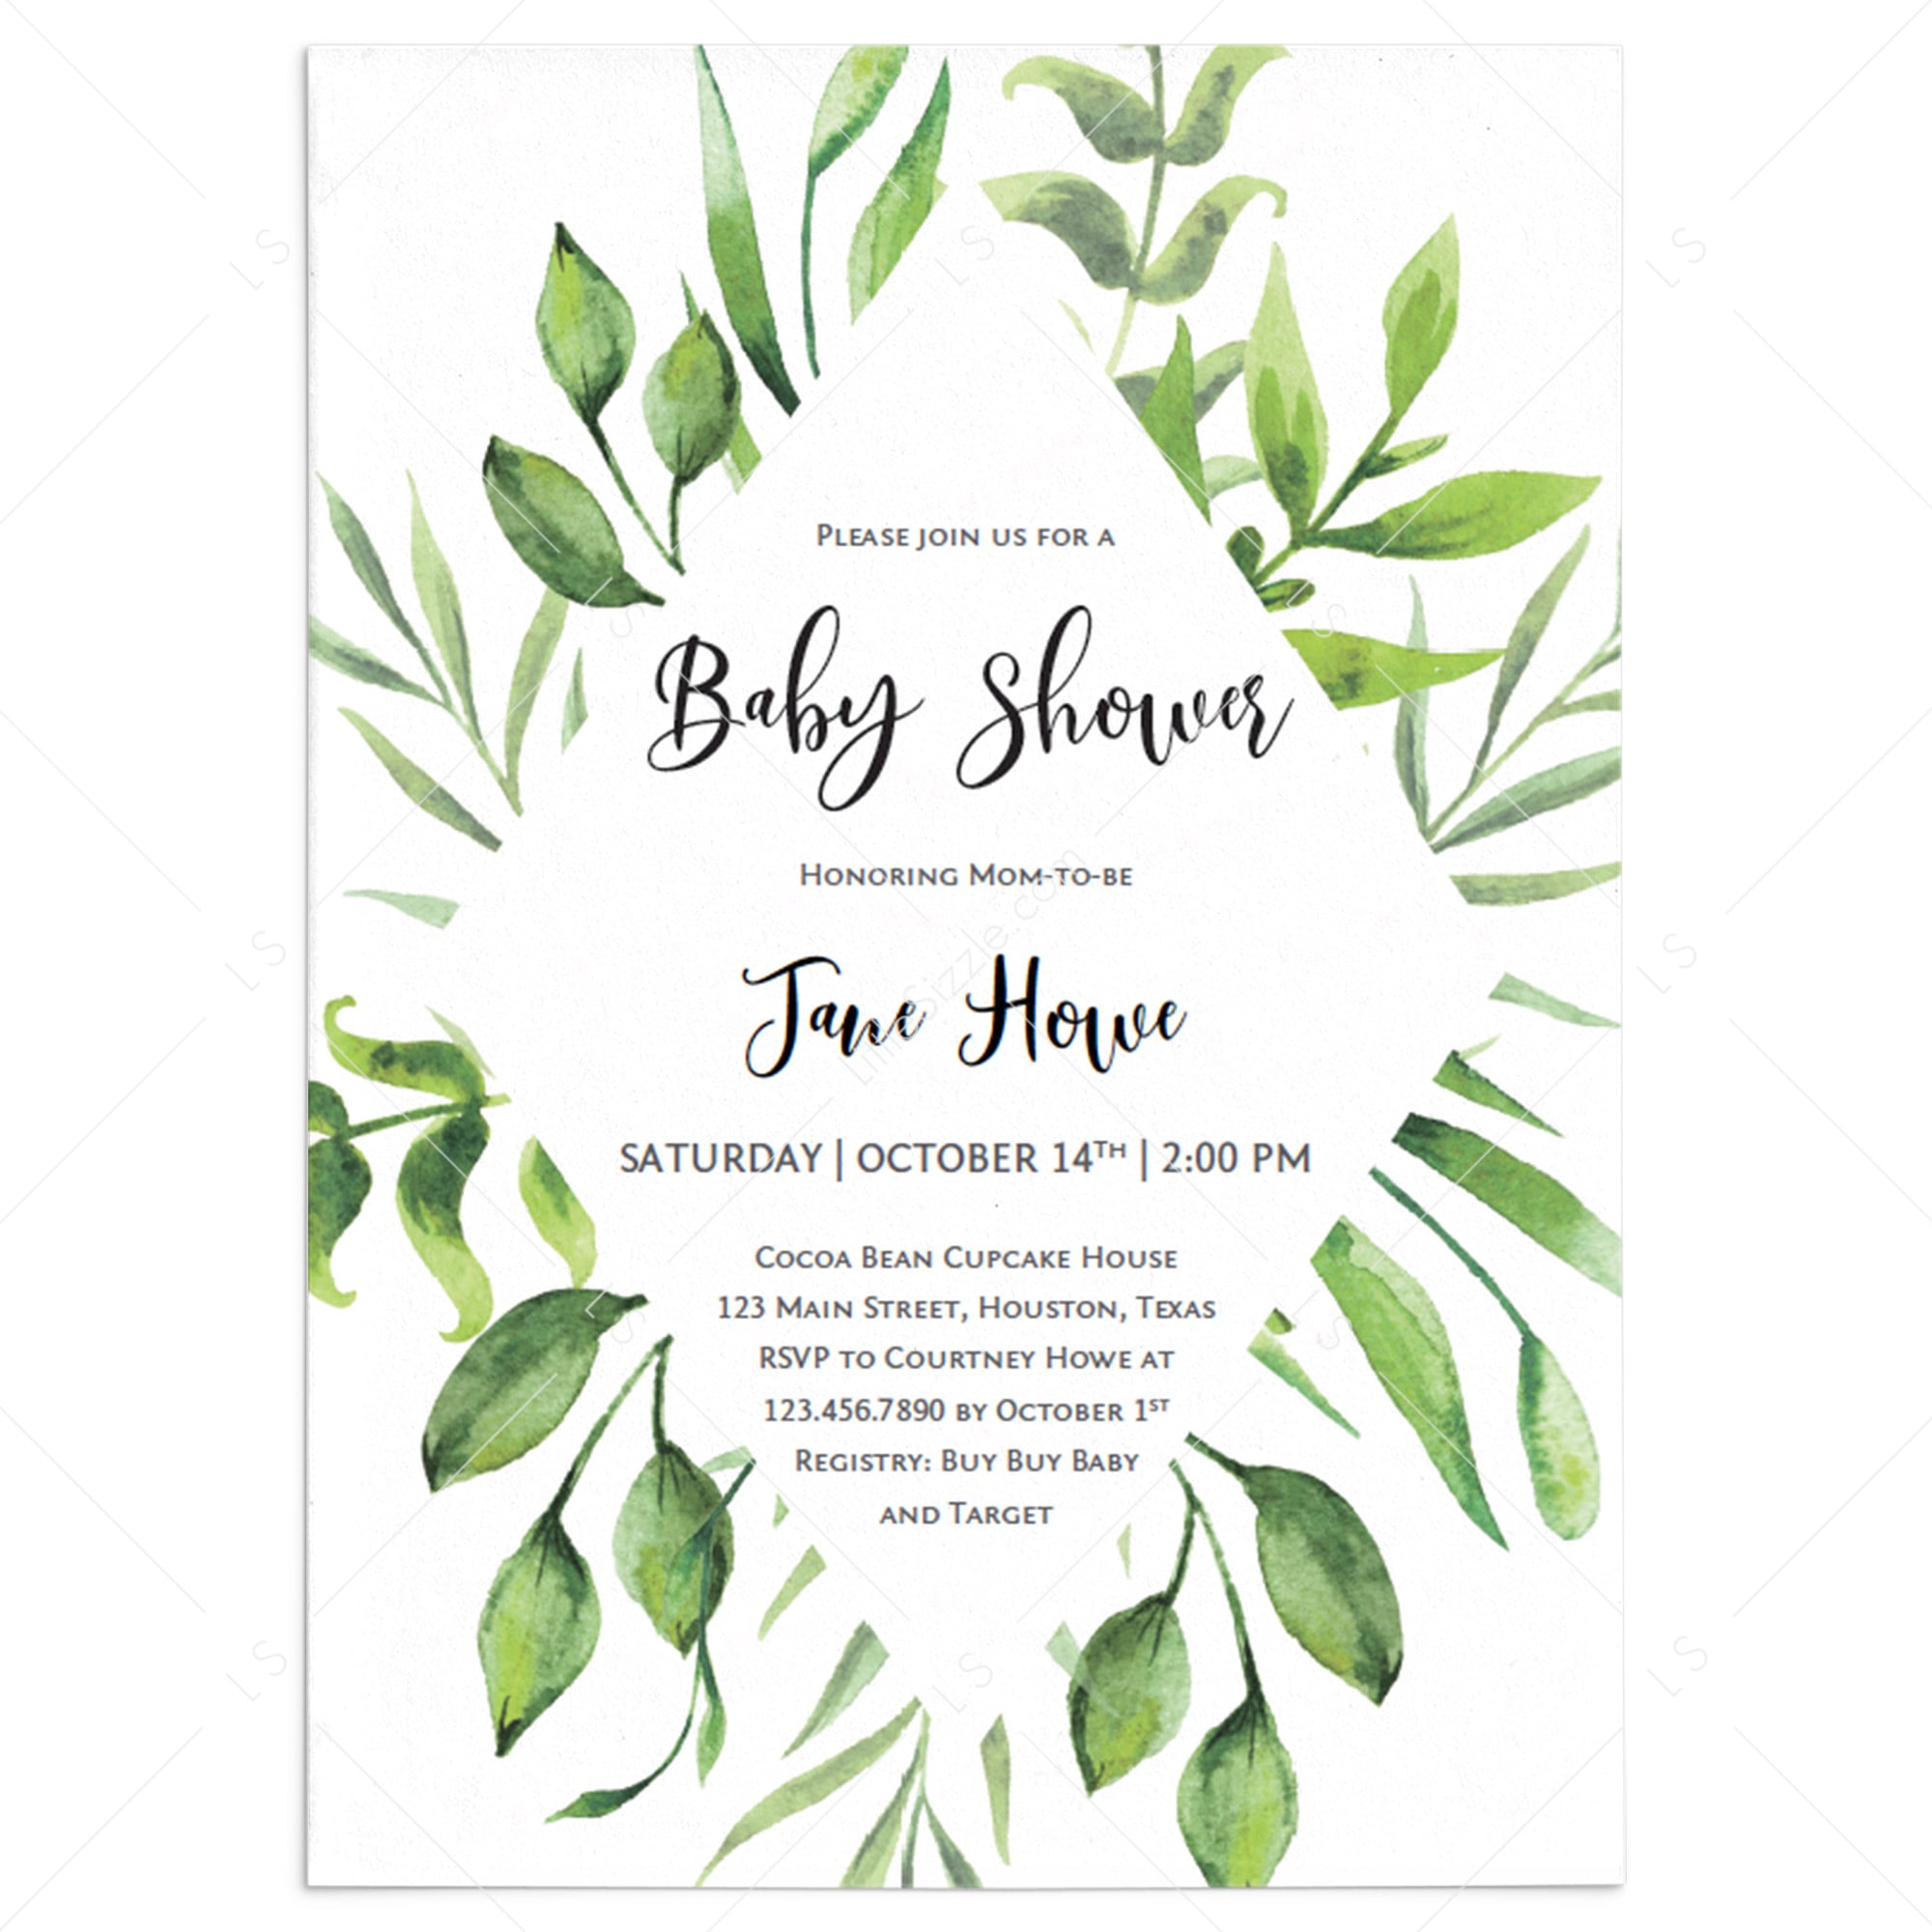 Fern and leaves baby shower invitation template by LittleSizzle